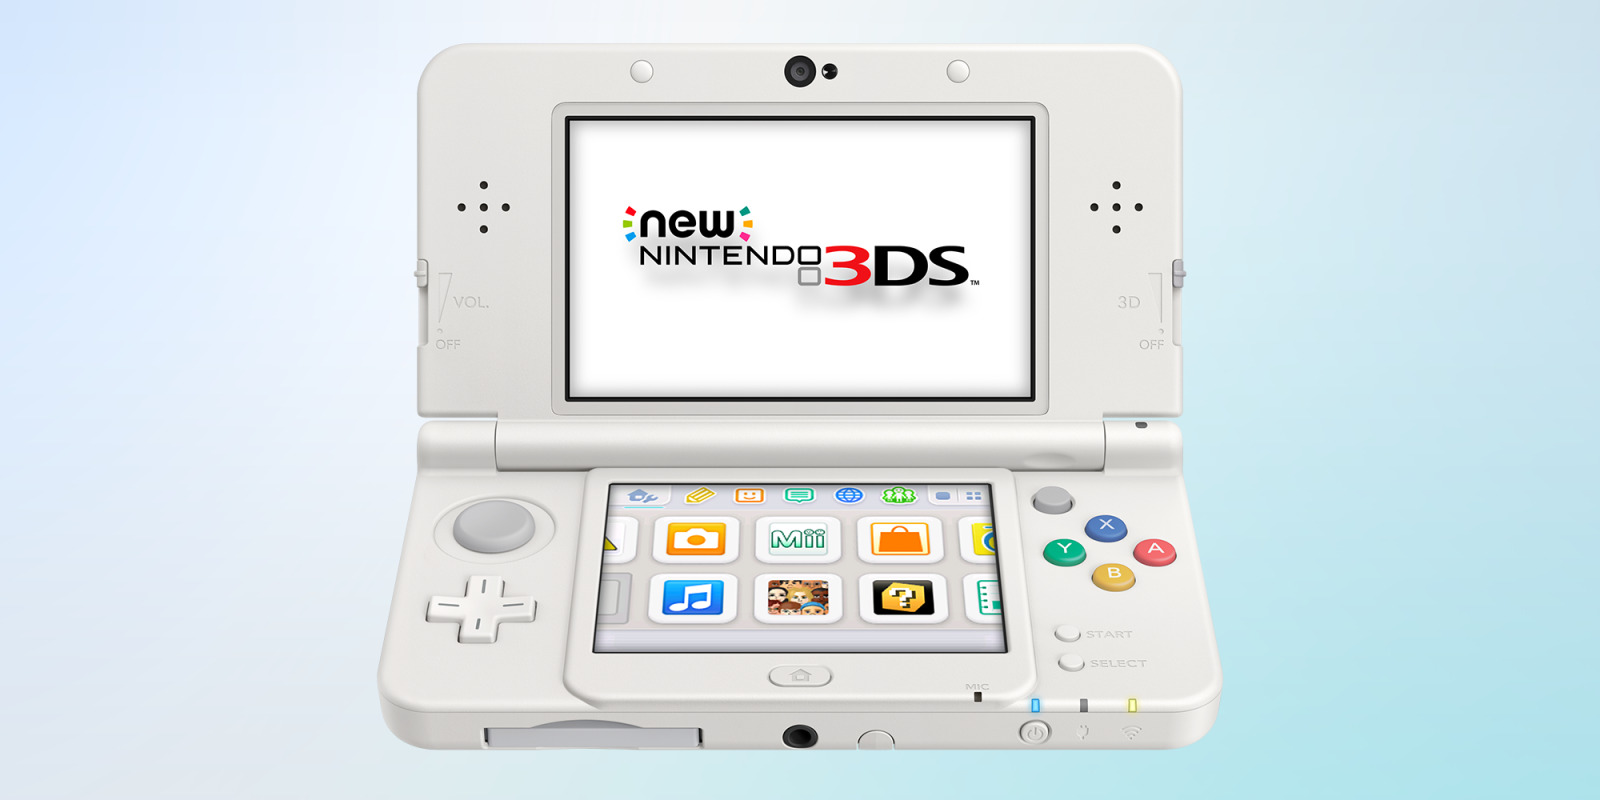 3ds games coming out in 2020